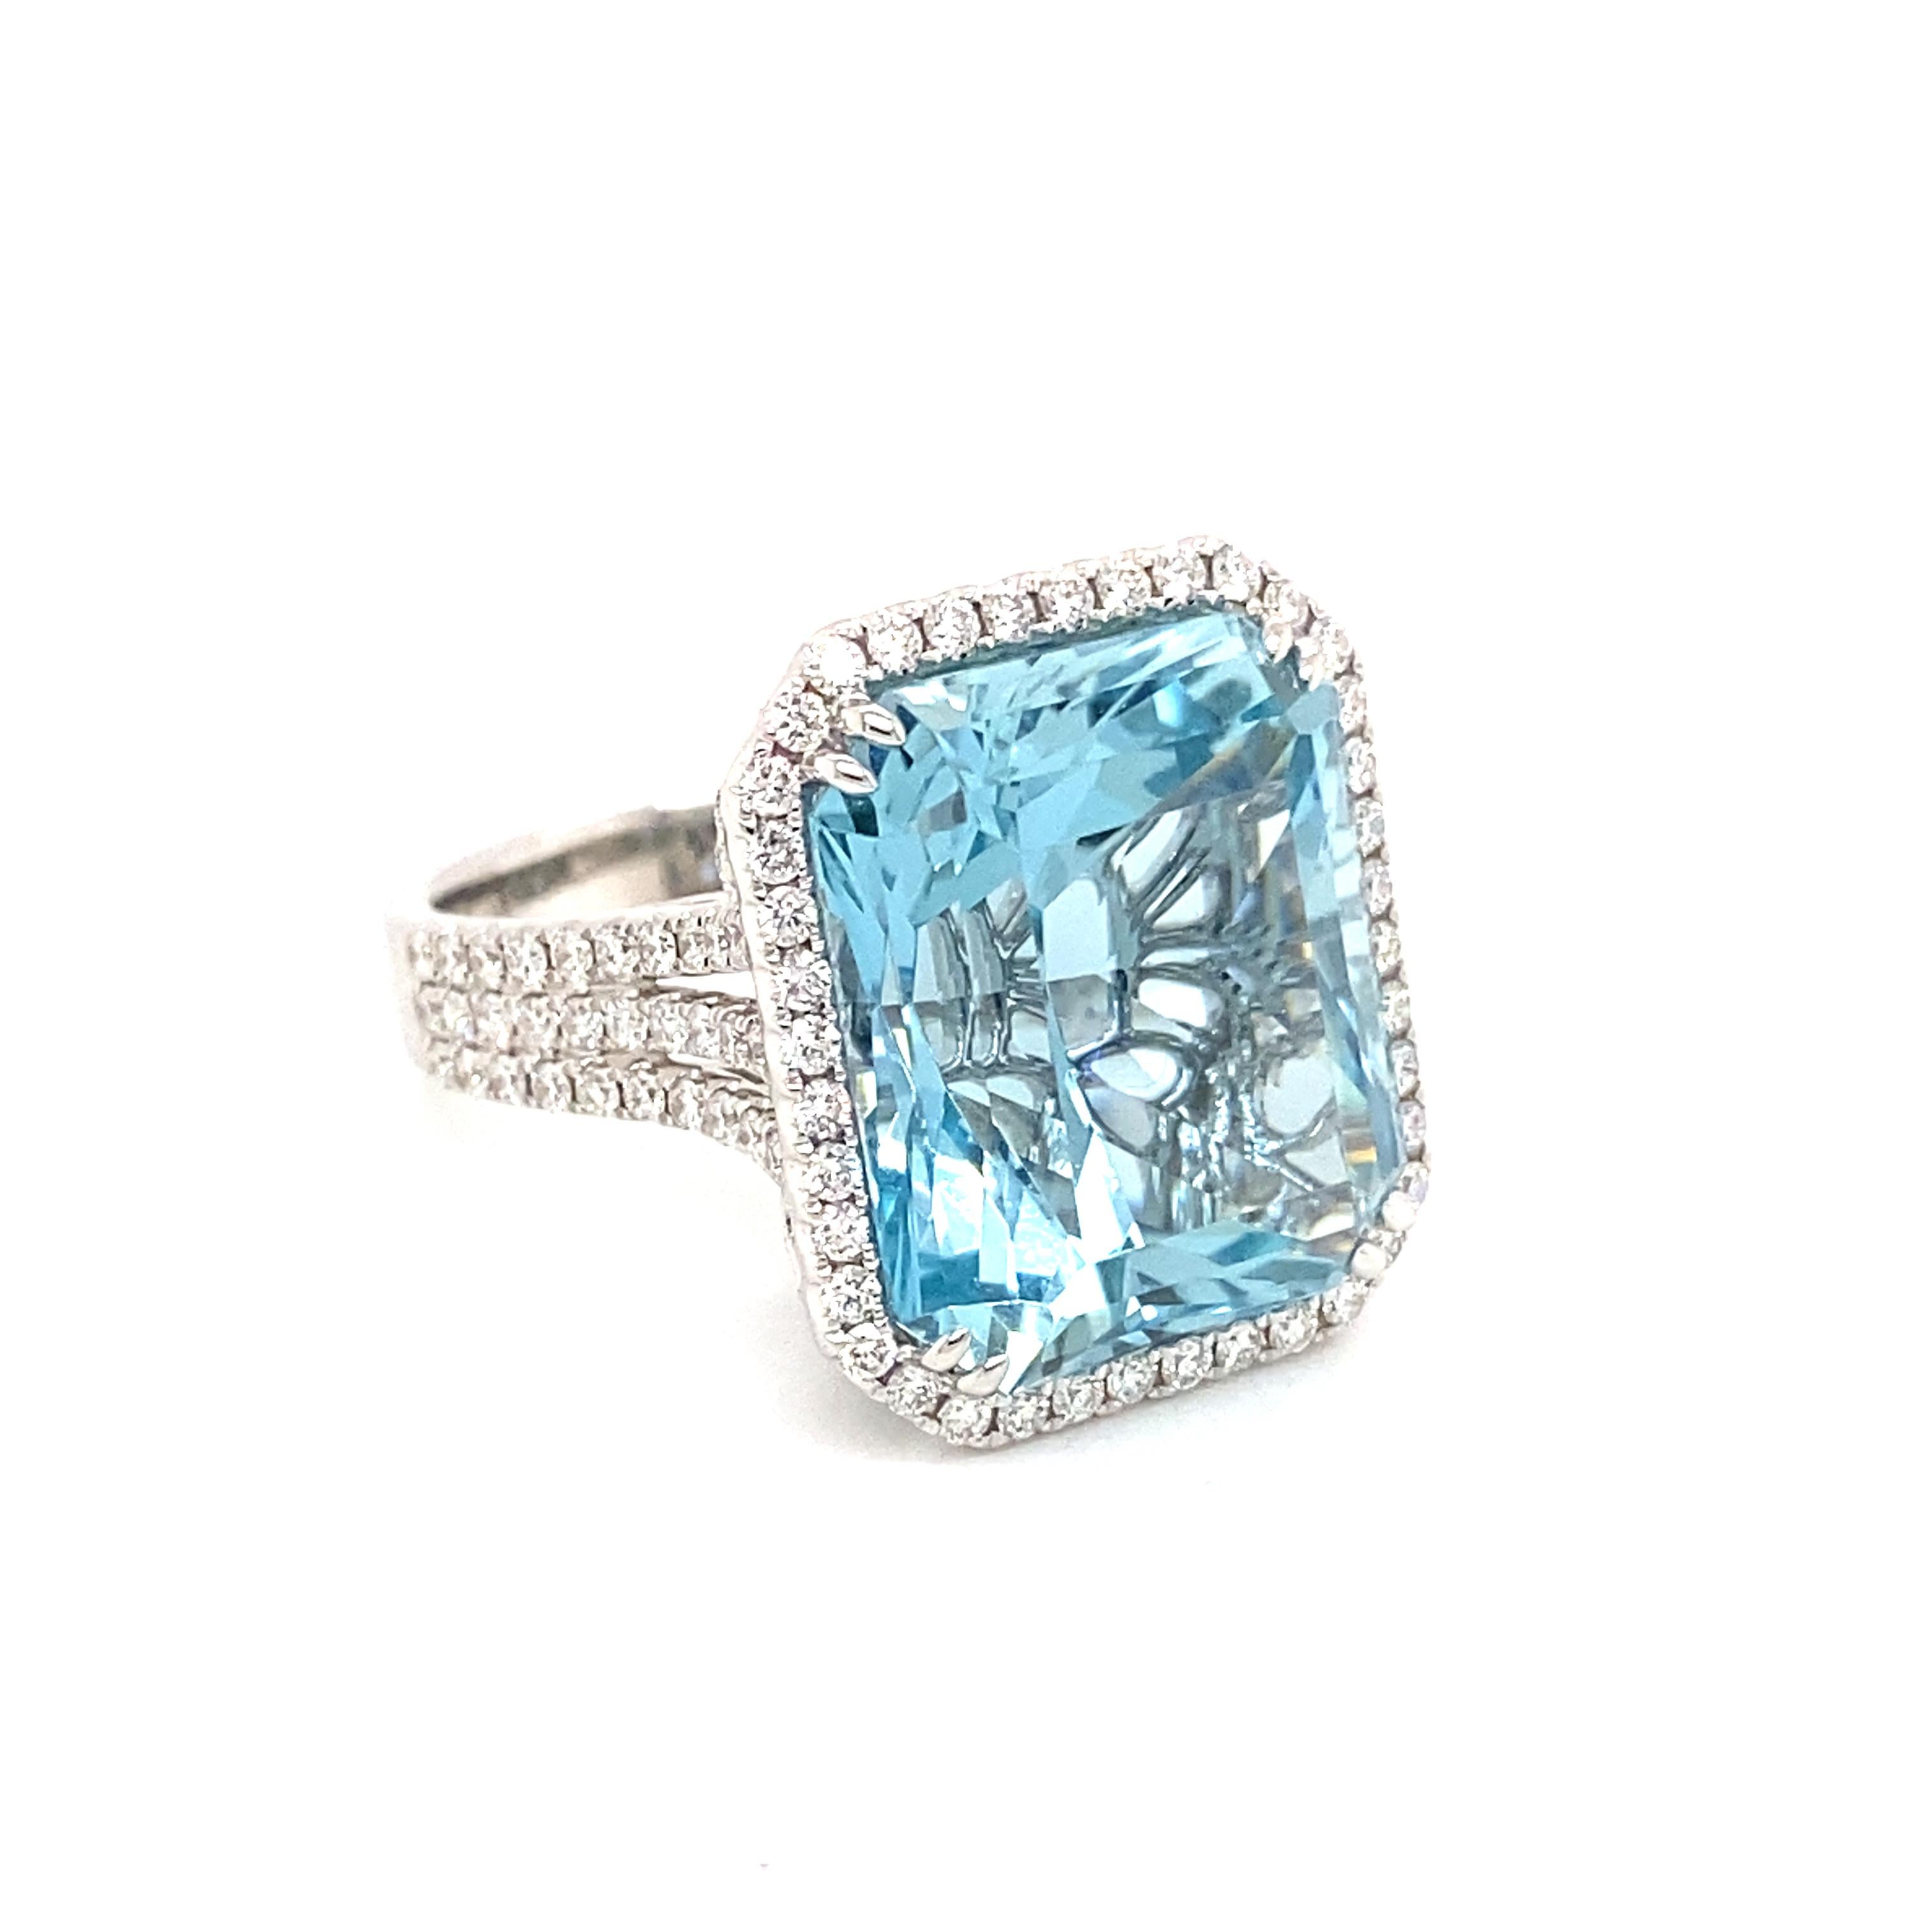 16.79 Carat Emerald Cut Aquamarine and Diamond Cocktail Ring In New Condition For Sale In Great Neck, NY